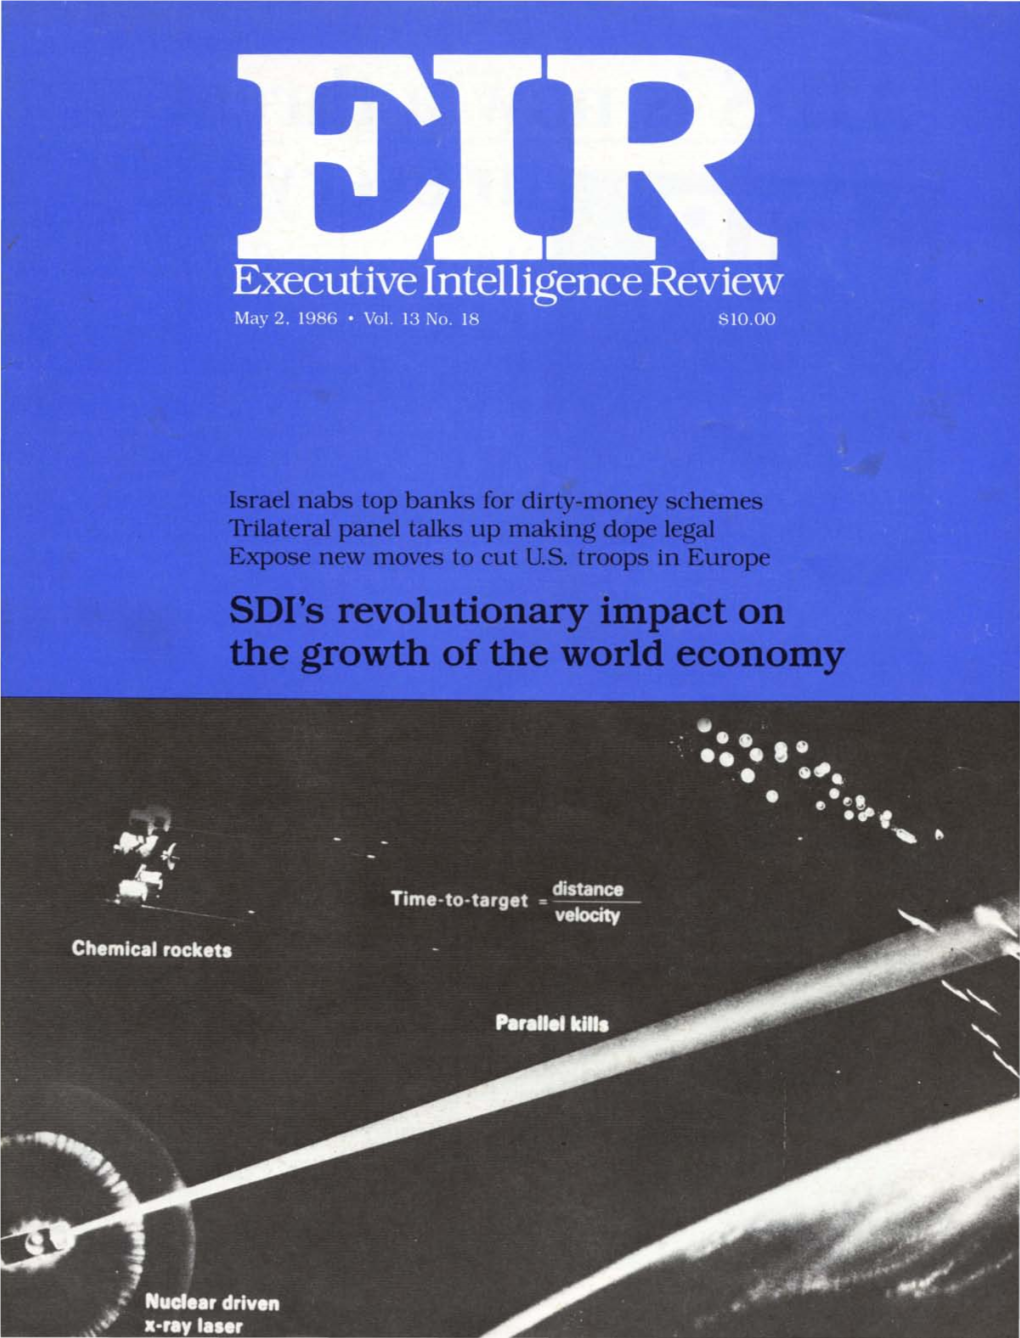 Executive Intelligence Review, Volume 13, Number 18, May 2, 1986